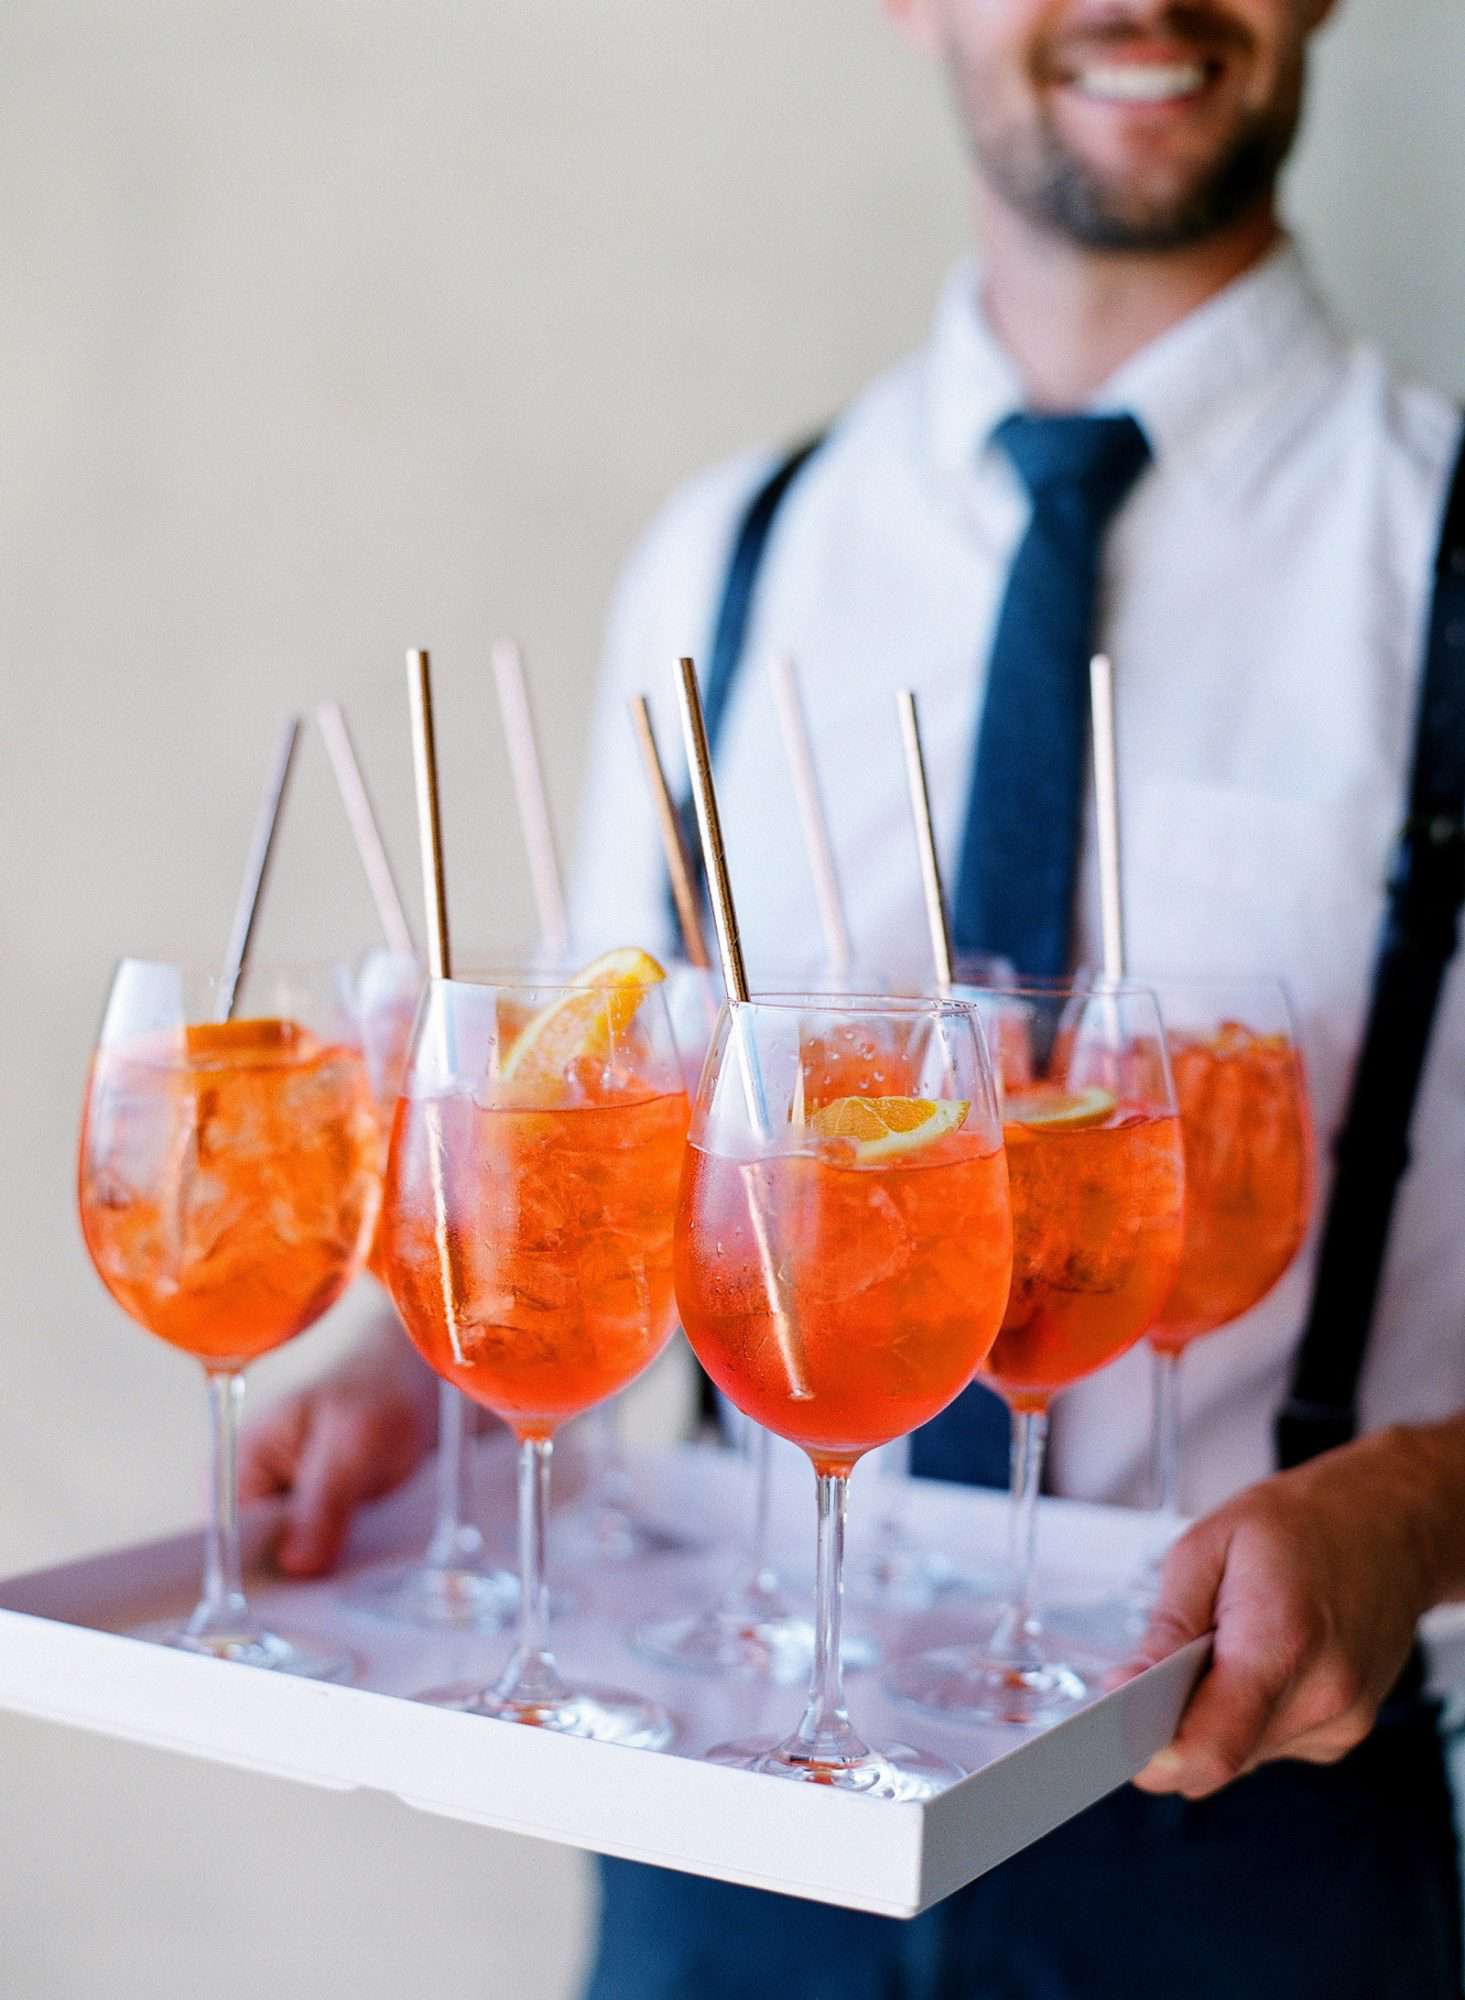 man carrying tray of aperol-spritz